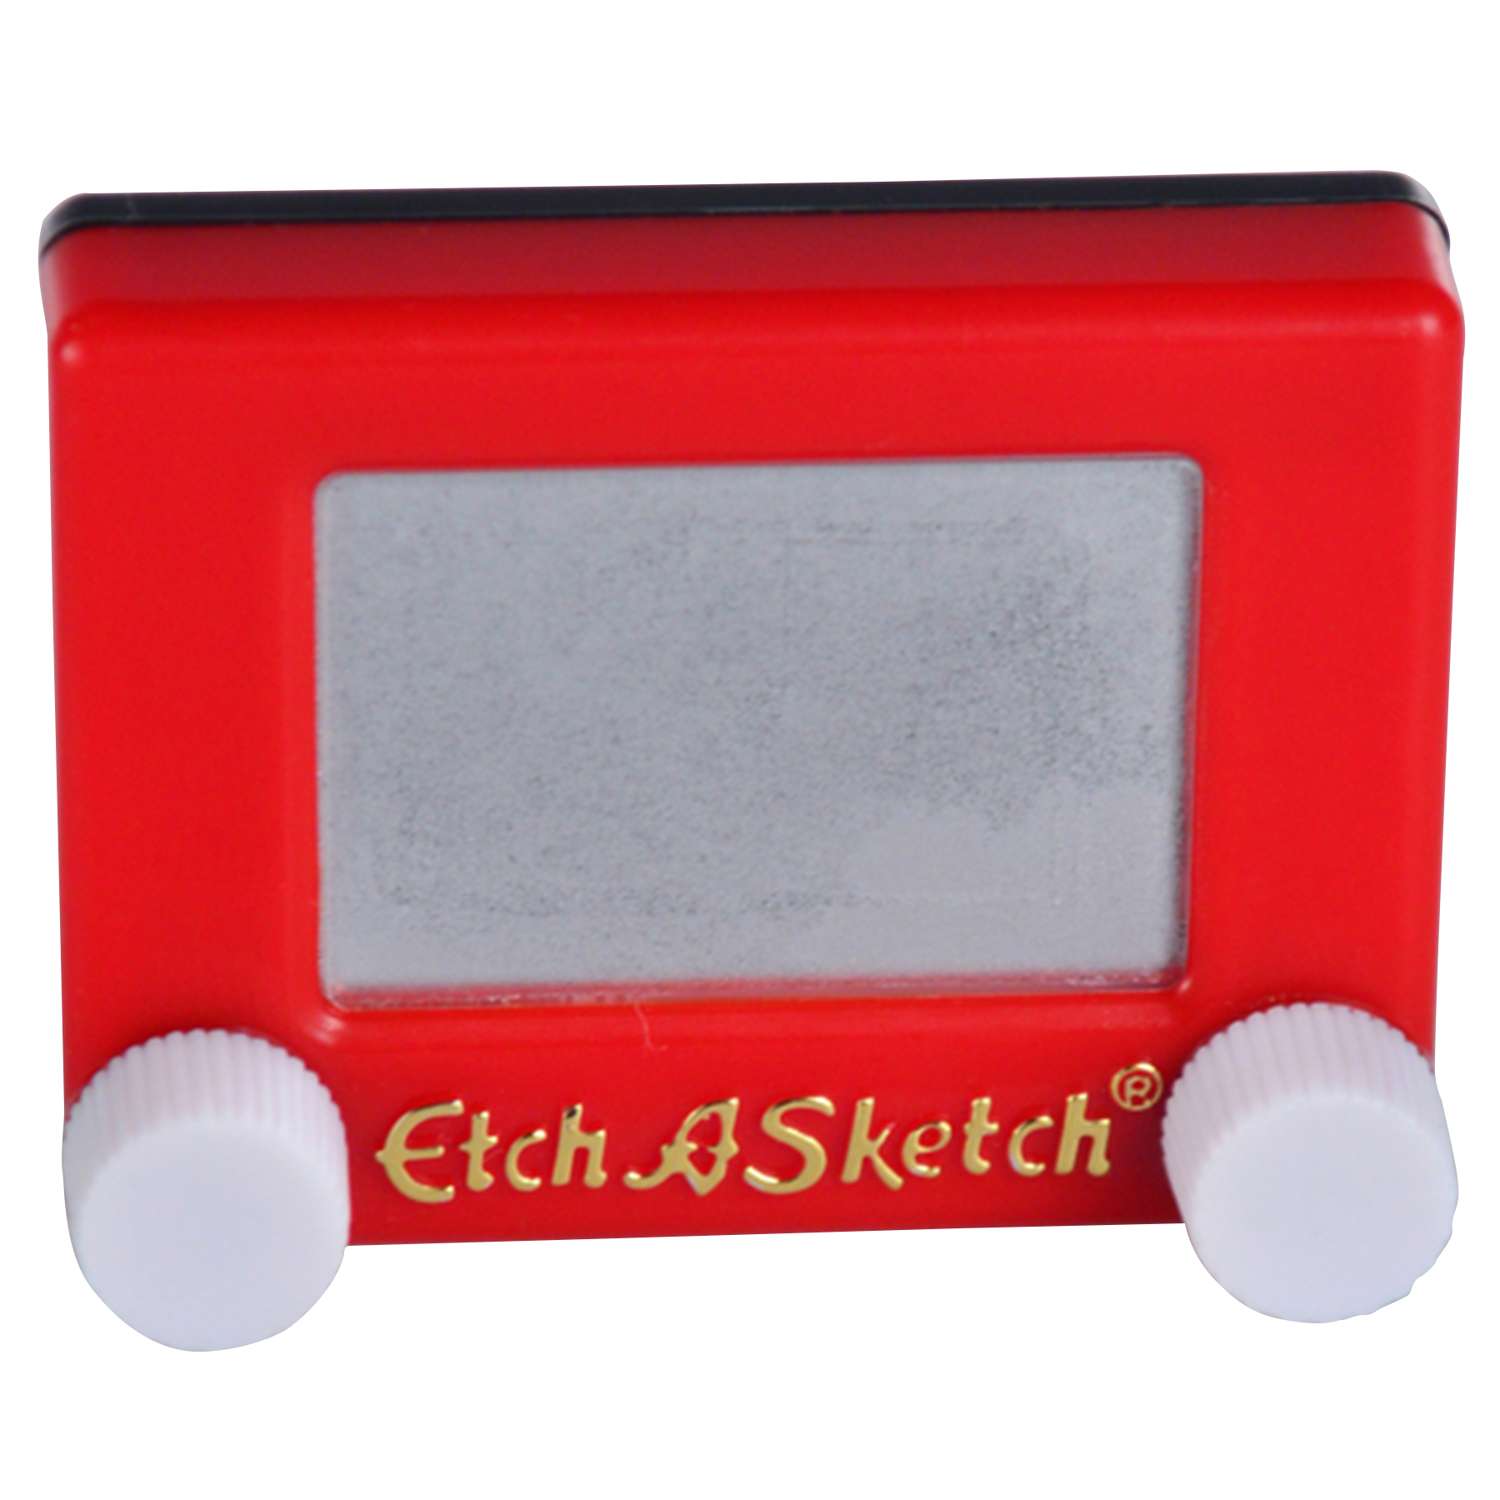 Etch A Sketch Toy Story Room Decor Whiteboard Wall Hanger for Kids